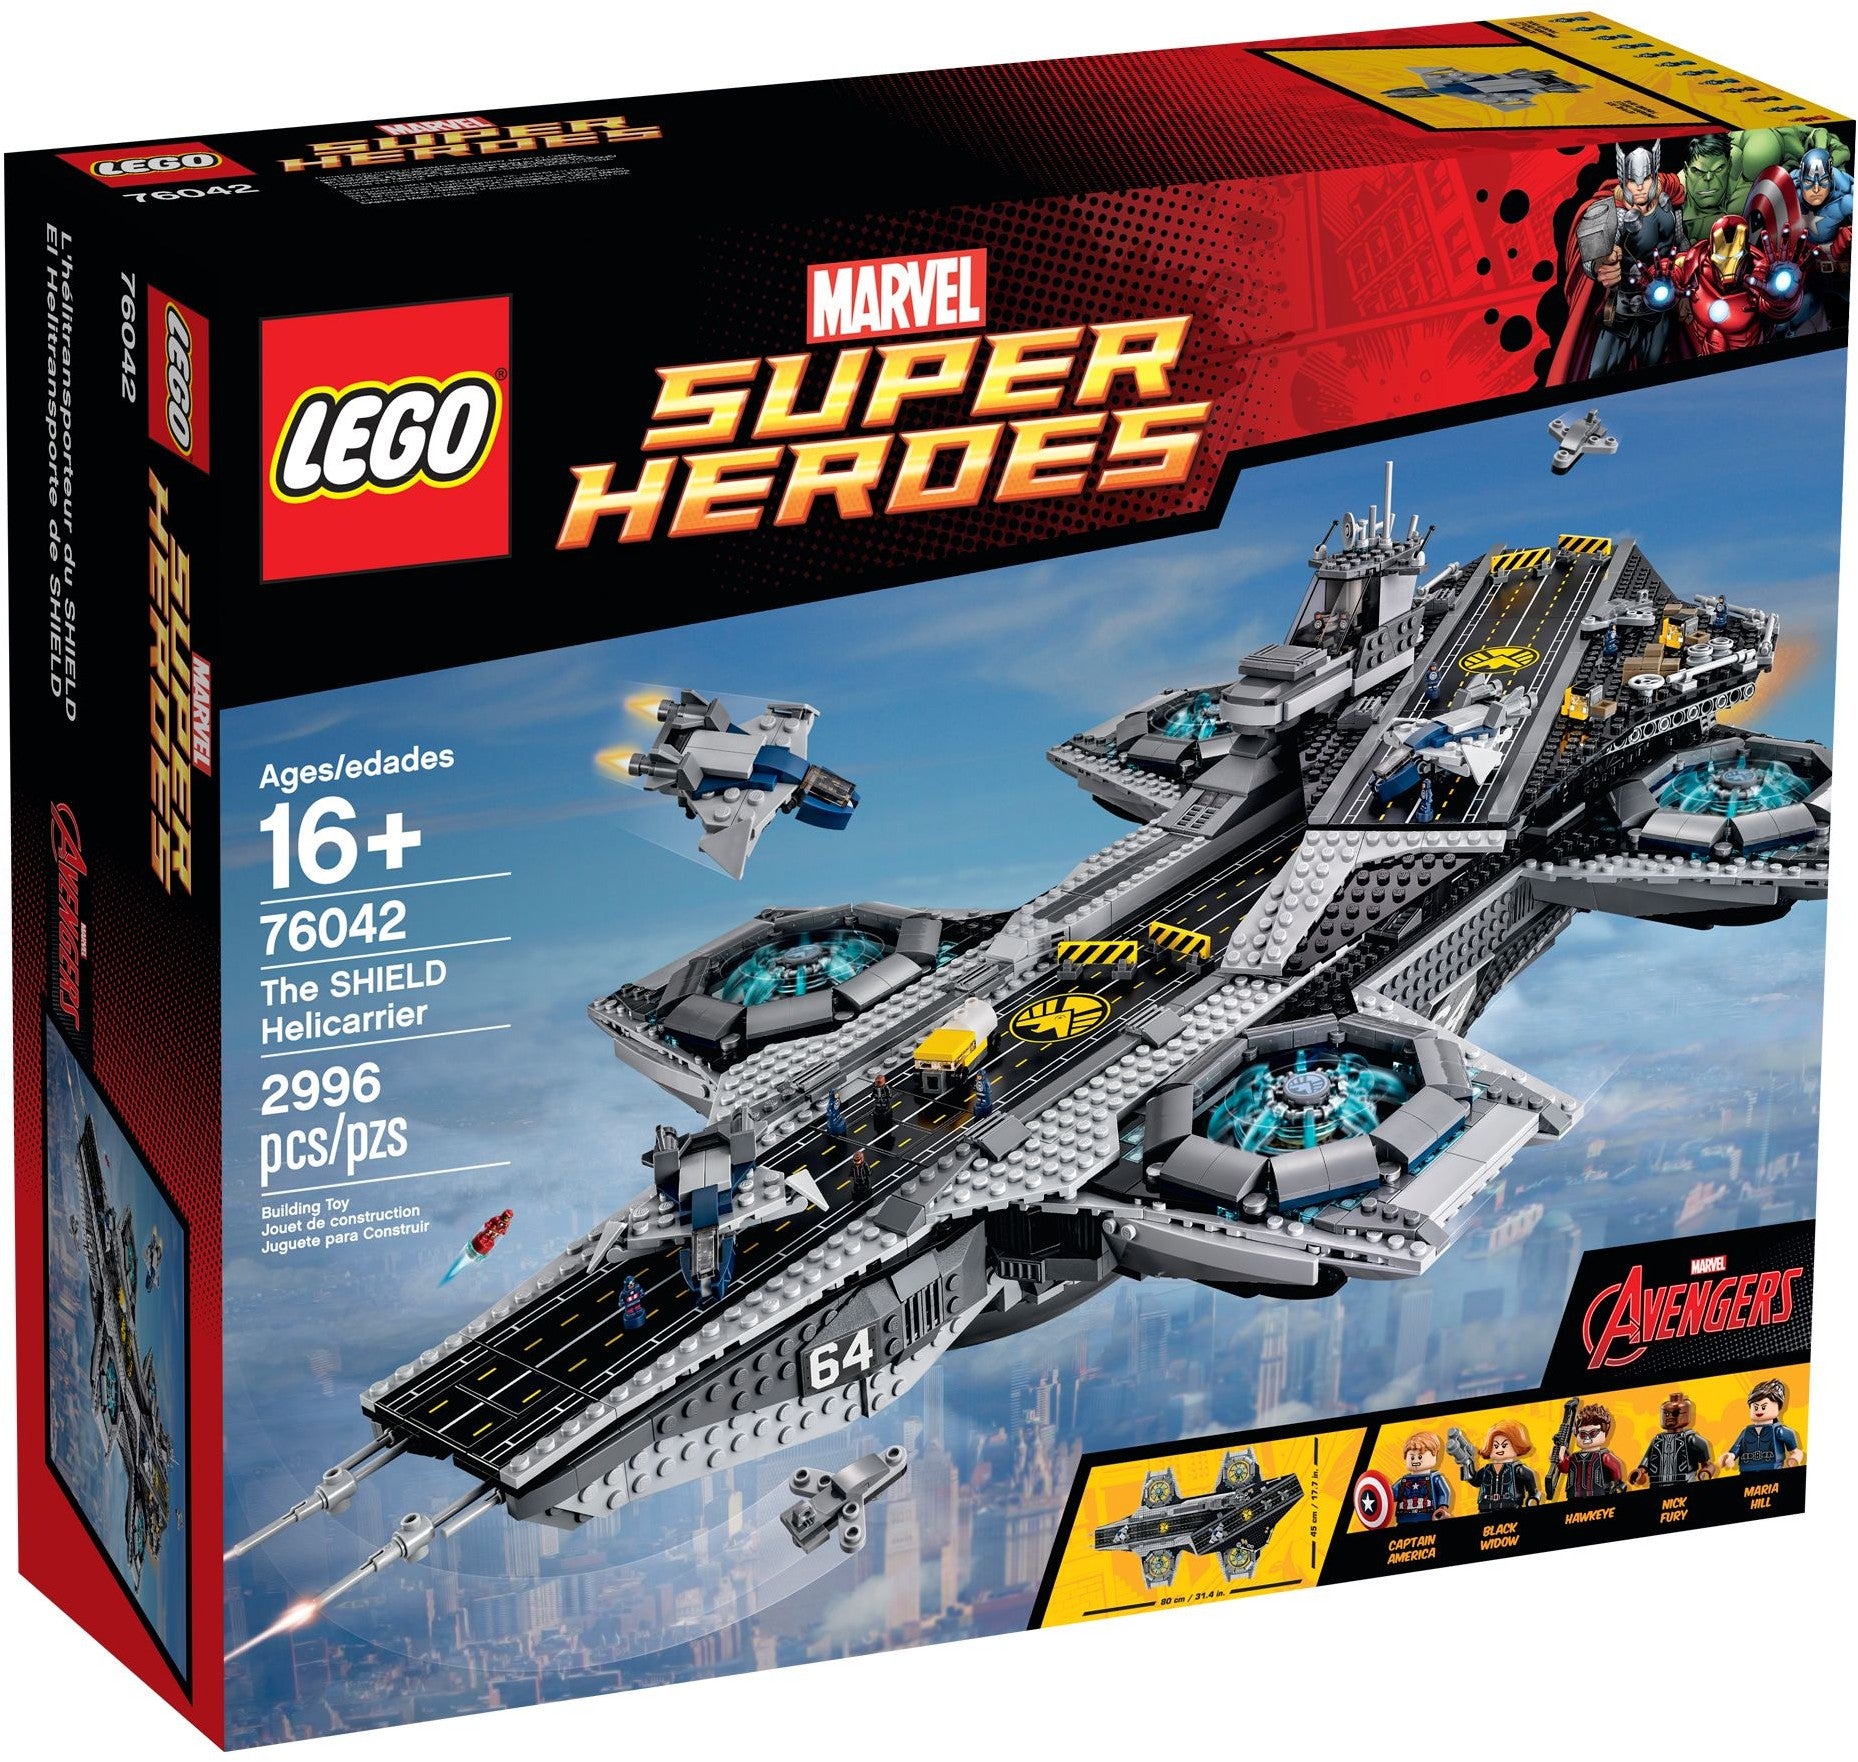 Lego Exclusive Super Heroes 76042 - The SHIELD Helicarrier